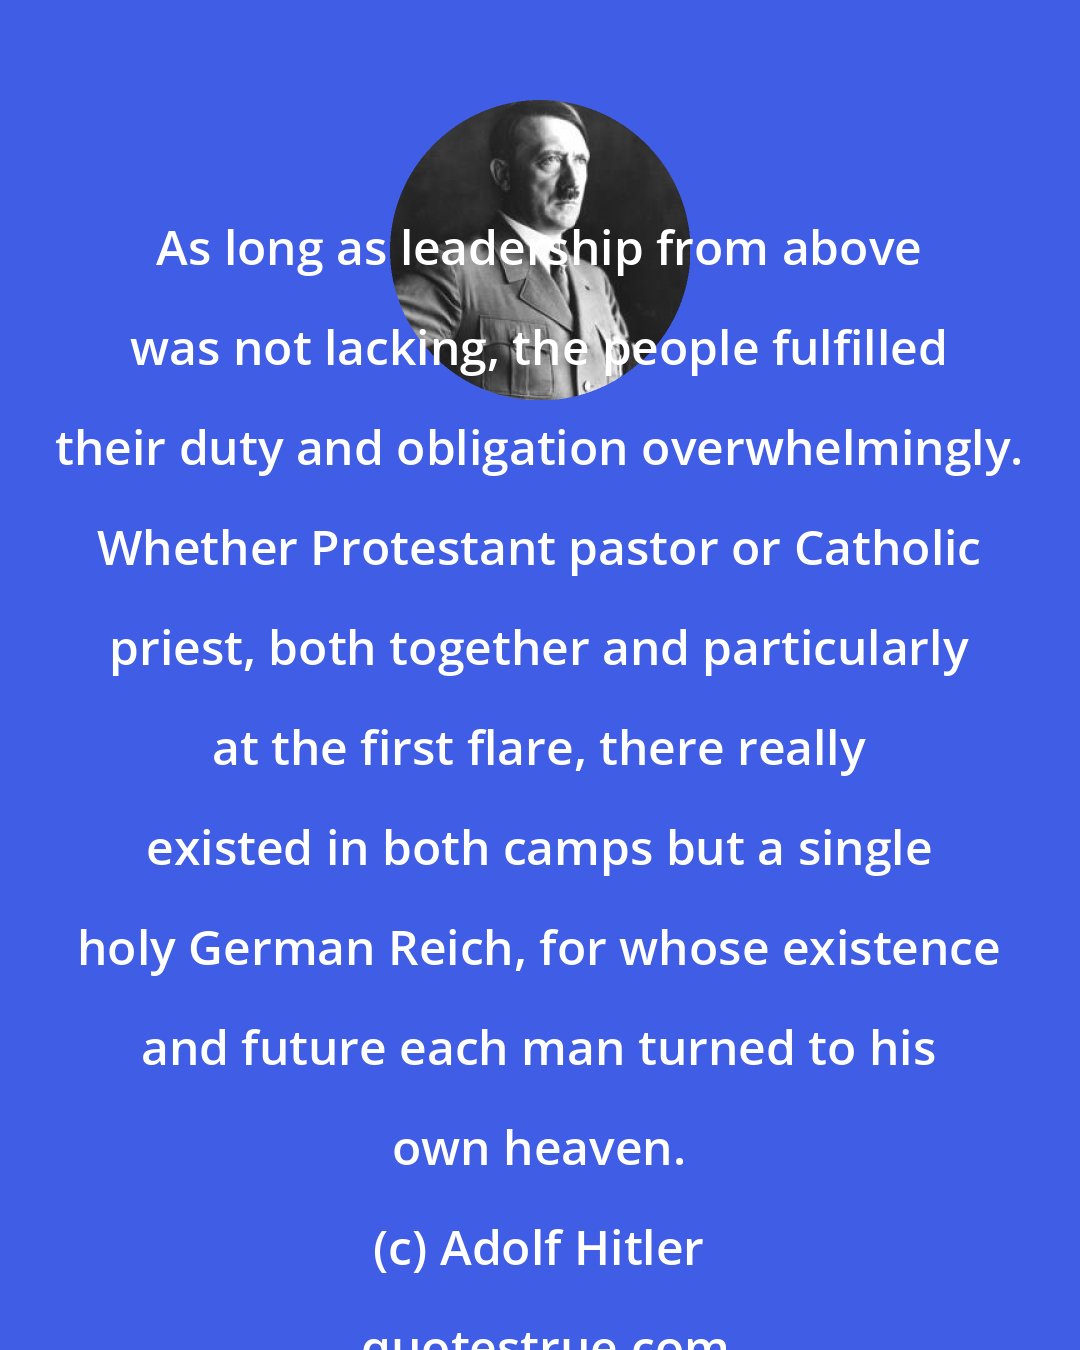 Adolf Hitler: As long as leadership from above was not lacking, the people fulfilled their duty and obligation overwhelmingly. Whether Protestant pastor or Catholic priest, both together and particularly at the first flare, there really existed in both camps but a single holy German Reich, for whose existence and future each man turned to his own heaven.